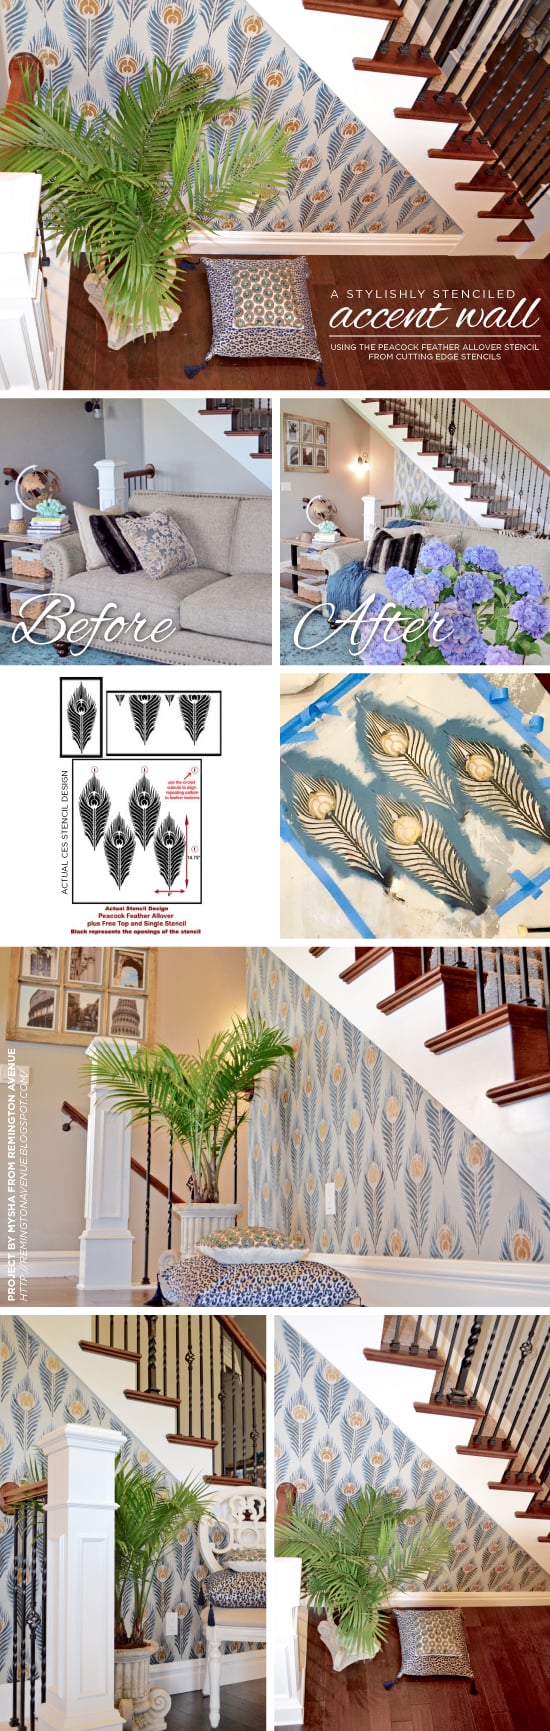 Cutting Edge Stencils shares a DIY stenciled accent wall using the Peacock Feather Allover Stencil. Stenciling the Peacock Feather allover stencil pattern on an accent wall. http://www.cuttingedgestencils.com/peacock-feather-wall-stencil-pattern.html